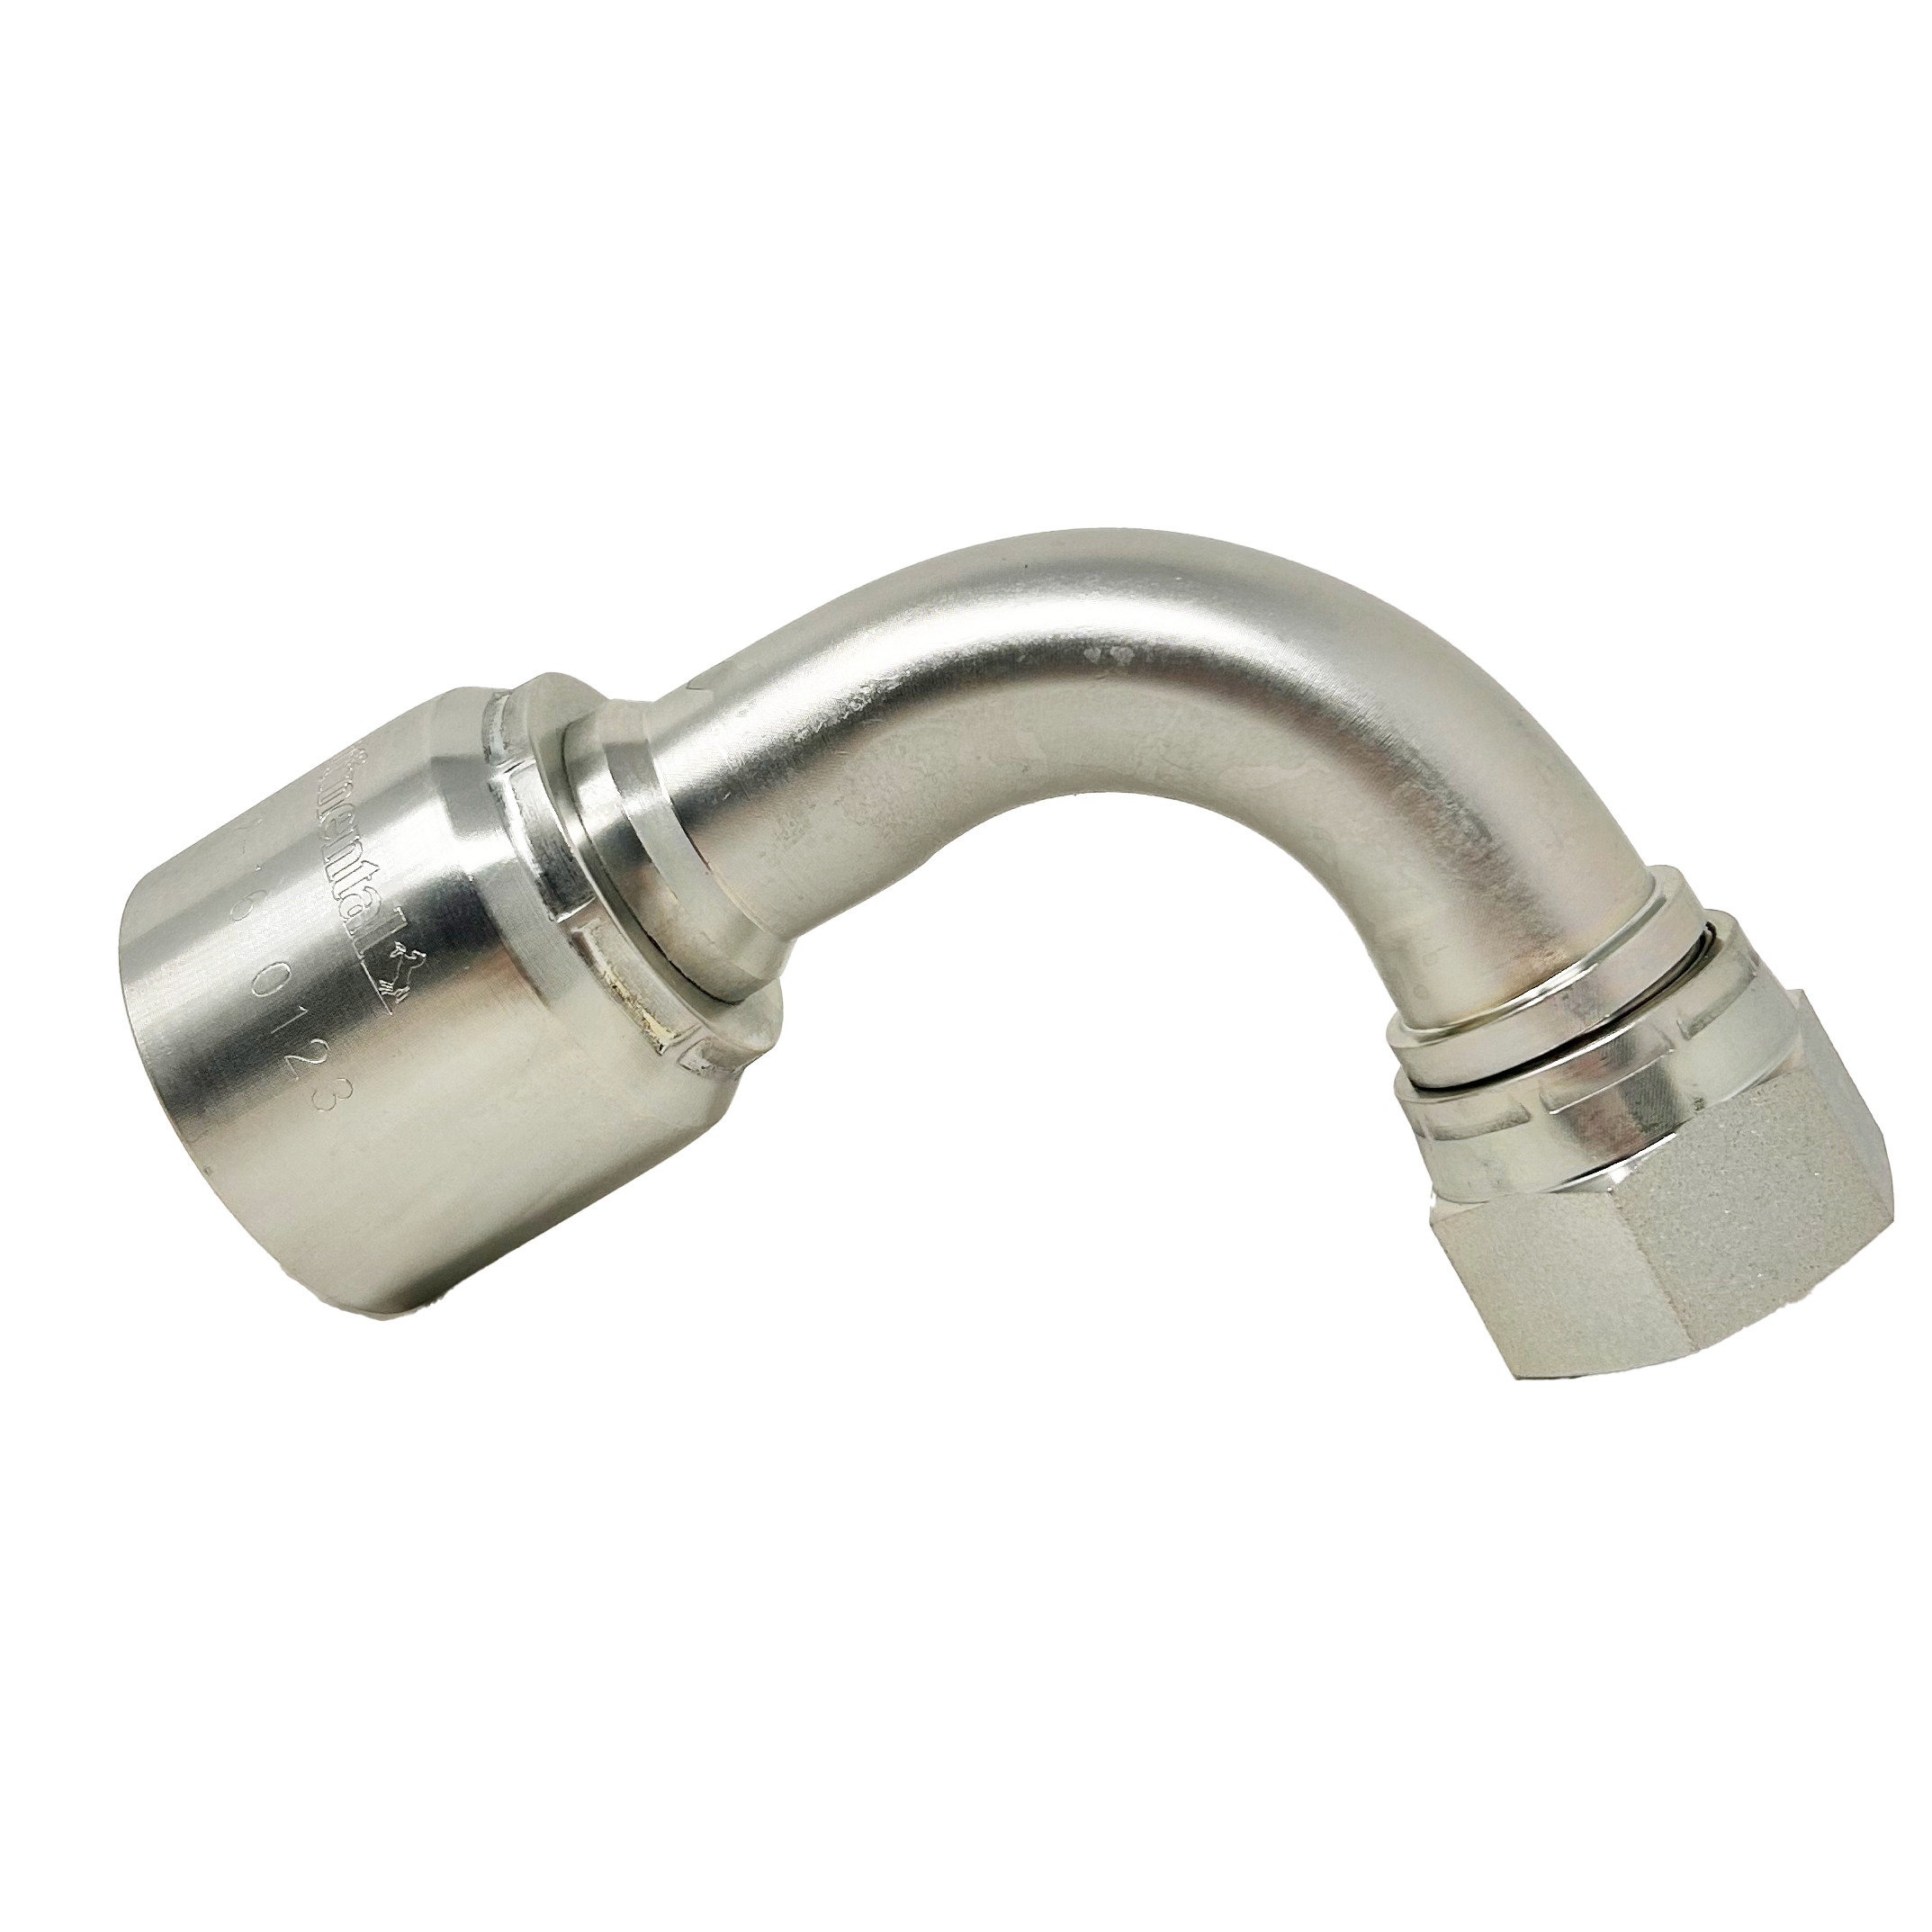 B2-JCFX90-1212S: Continental Hose Fitting, 0.75 (3/4") Hose ID x 1-1/16-12 Female JIC, 90-Degree Swivel Connection